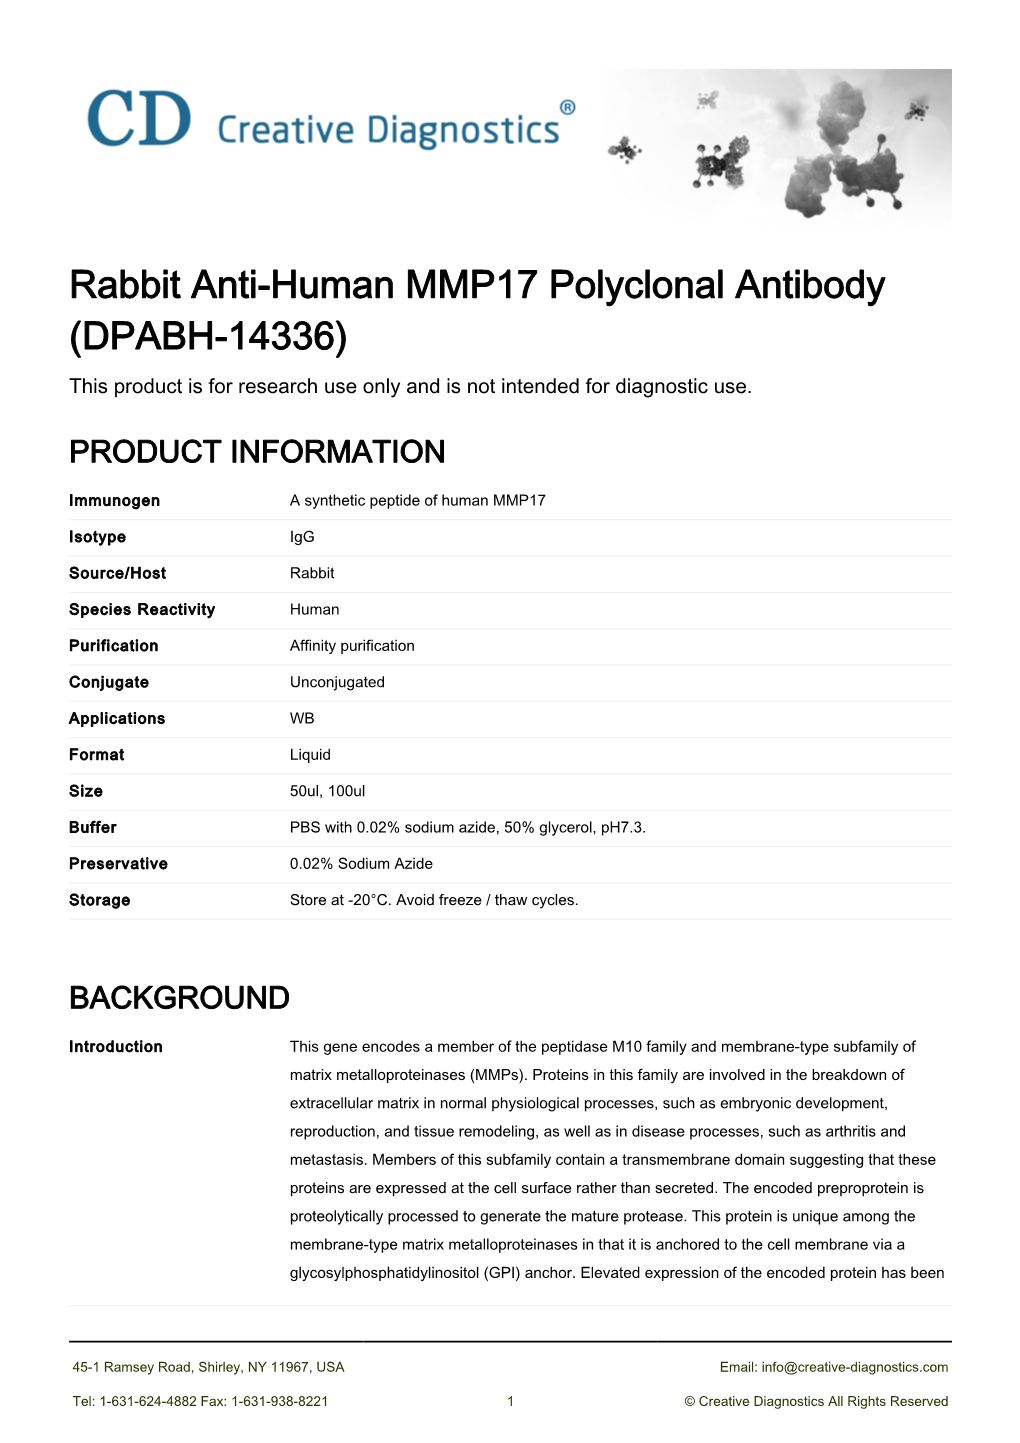 Rabbit Anti-Human MMP17 Polyclonal Antibody (DPABH-14336) This Product Is for Research Use Only and Is Not Intended for Diagnostic Use